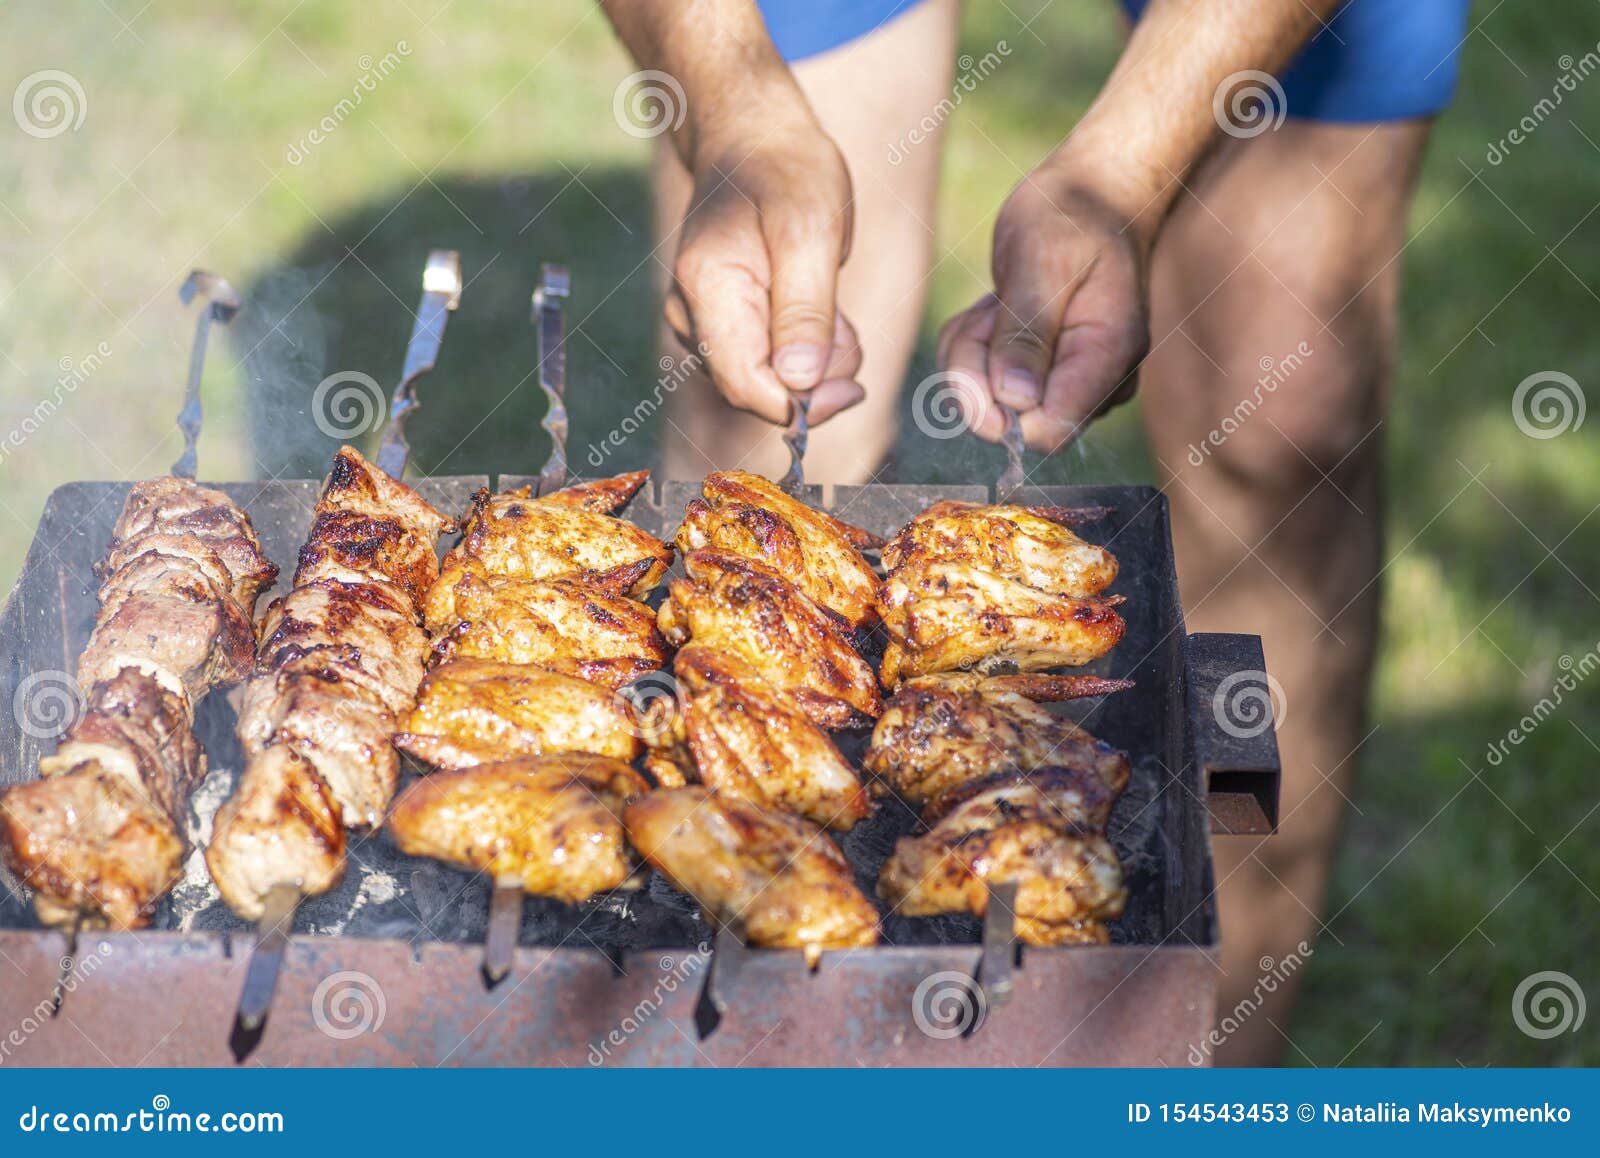 BBQ Chicken Wings in  Man Twirls Chicken Wings on Skewers Over  Mongal. Kebab Time. Fried Chicken  Stock Image - Image of  meal, sauces: 154543453